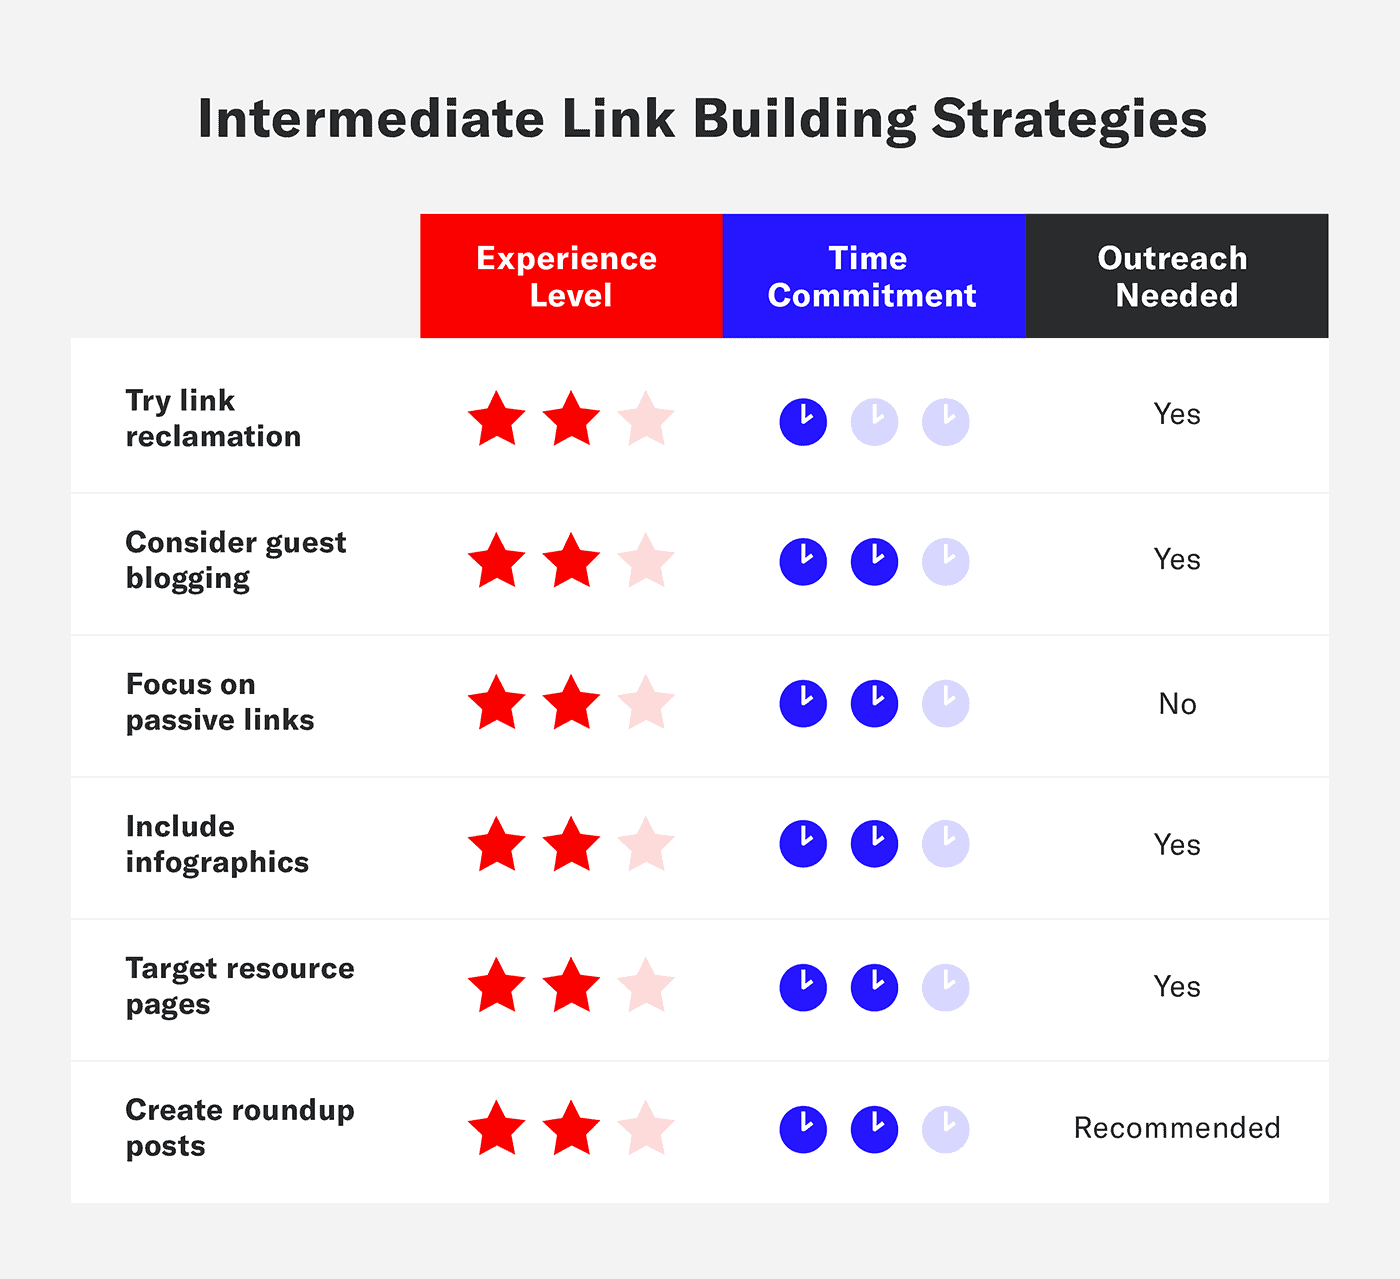 A graphic shows the intermediate link building strategies